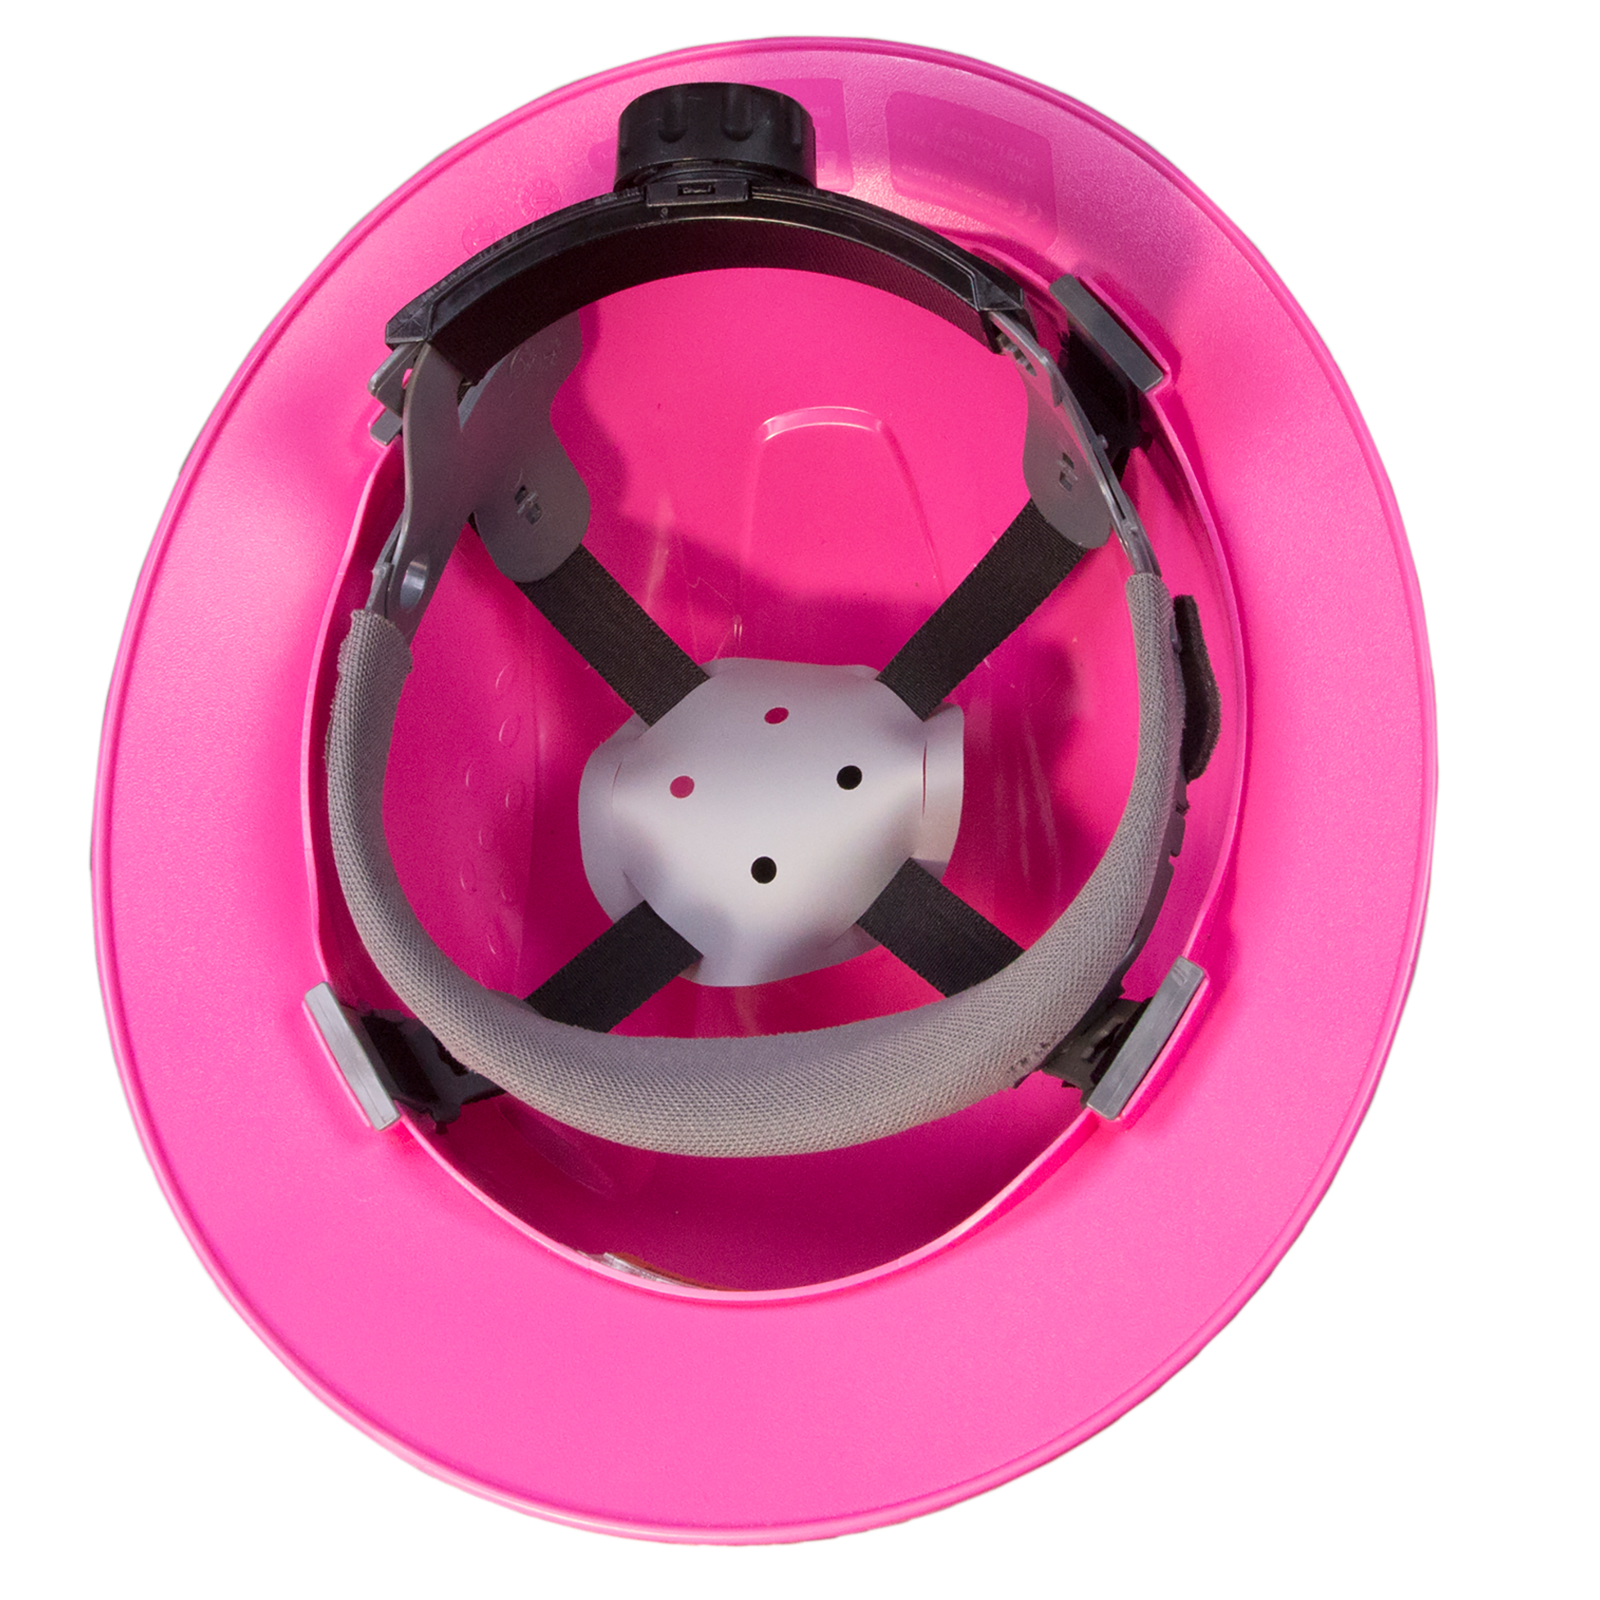 Full brim safety HDPE pink hard hat with 4 point suspension